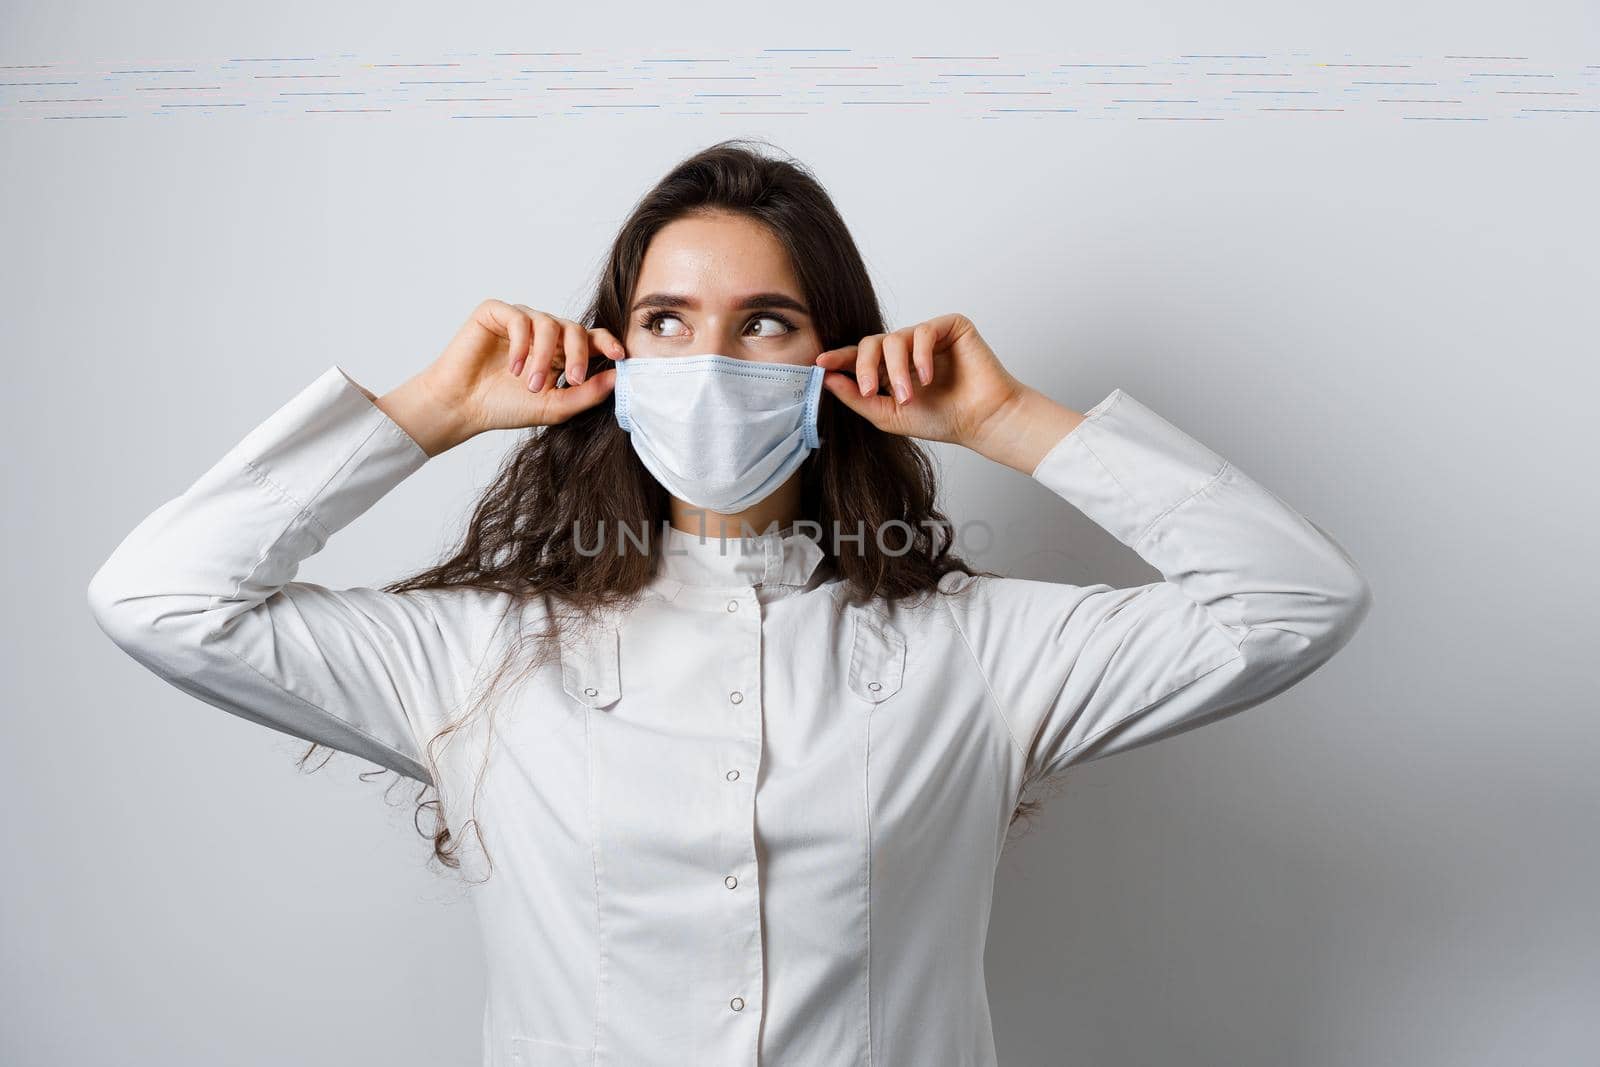 Doctor wearing medical mask on white background. Young attractive woman in medical robe. Quarantine coronavirus covid-19 trends.